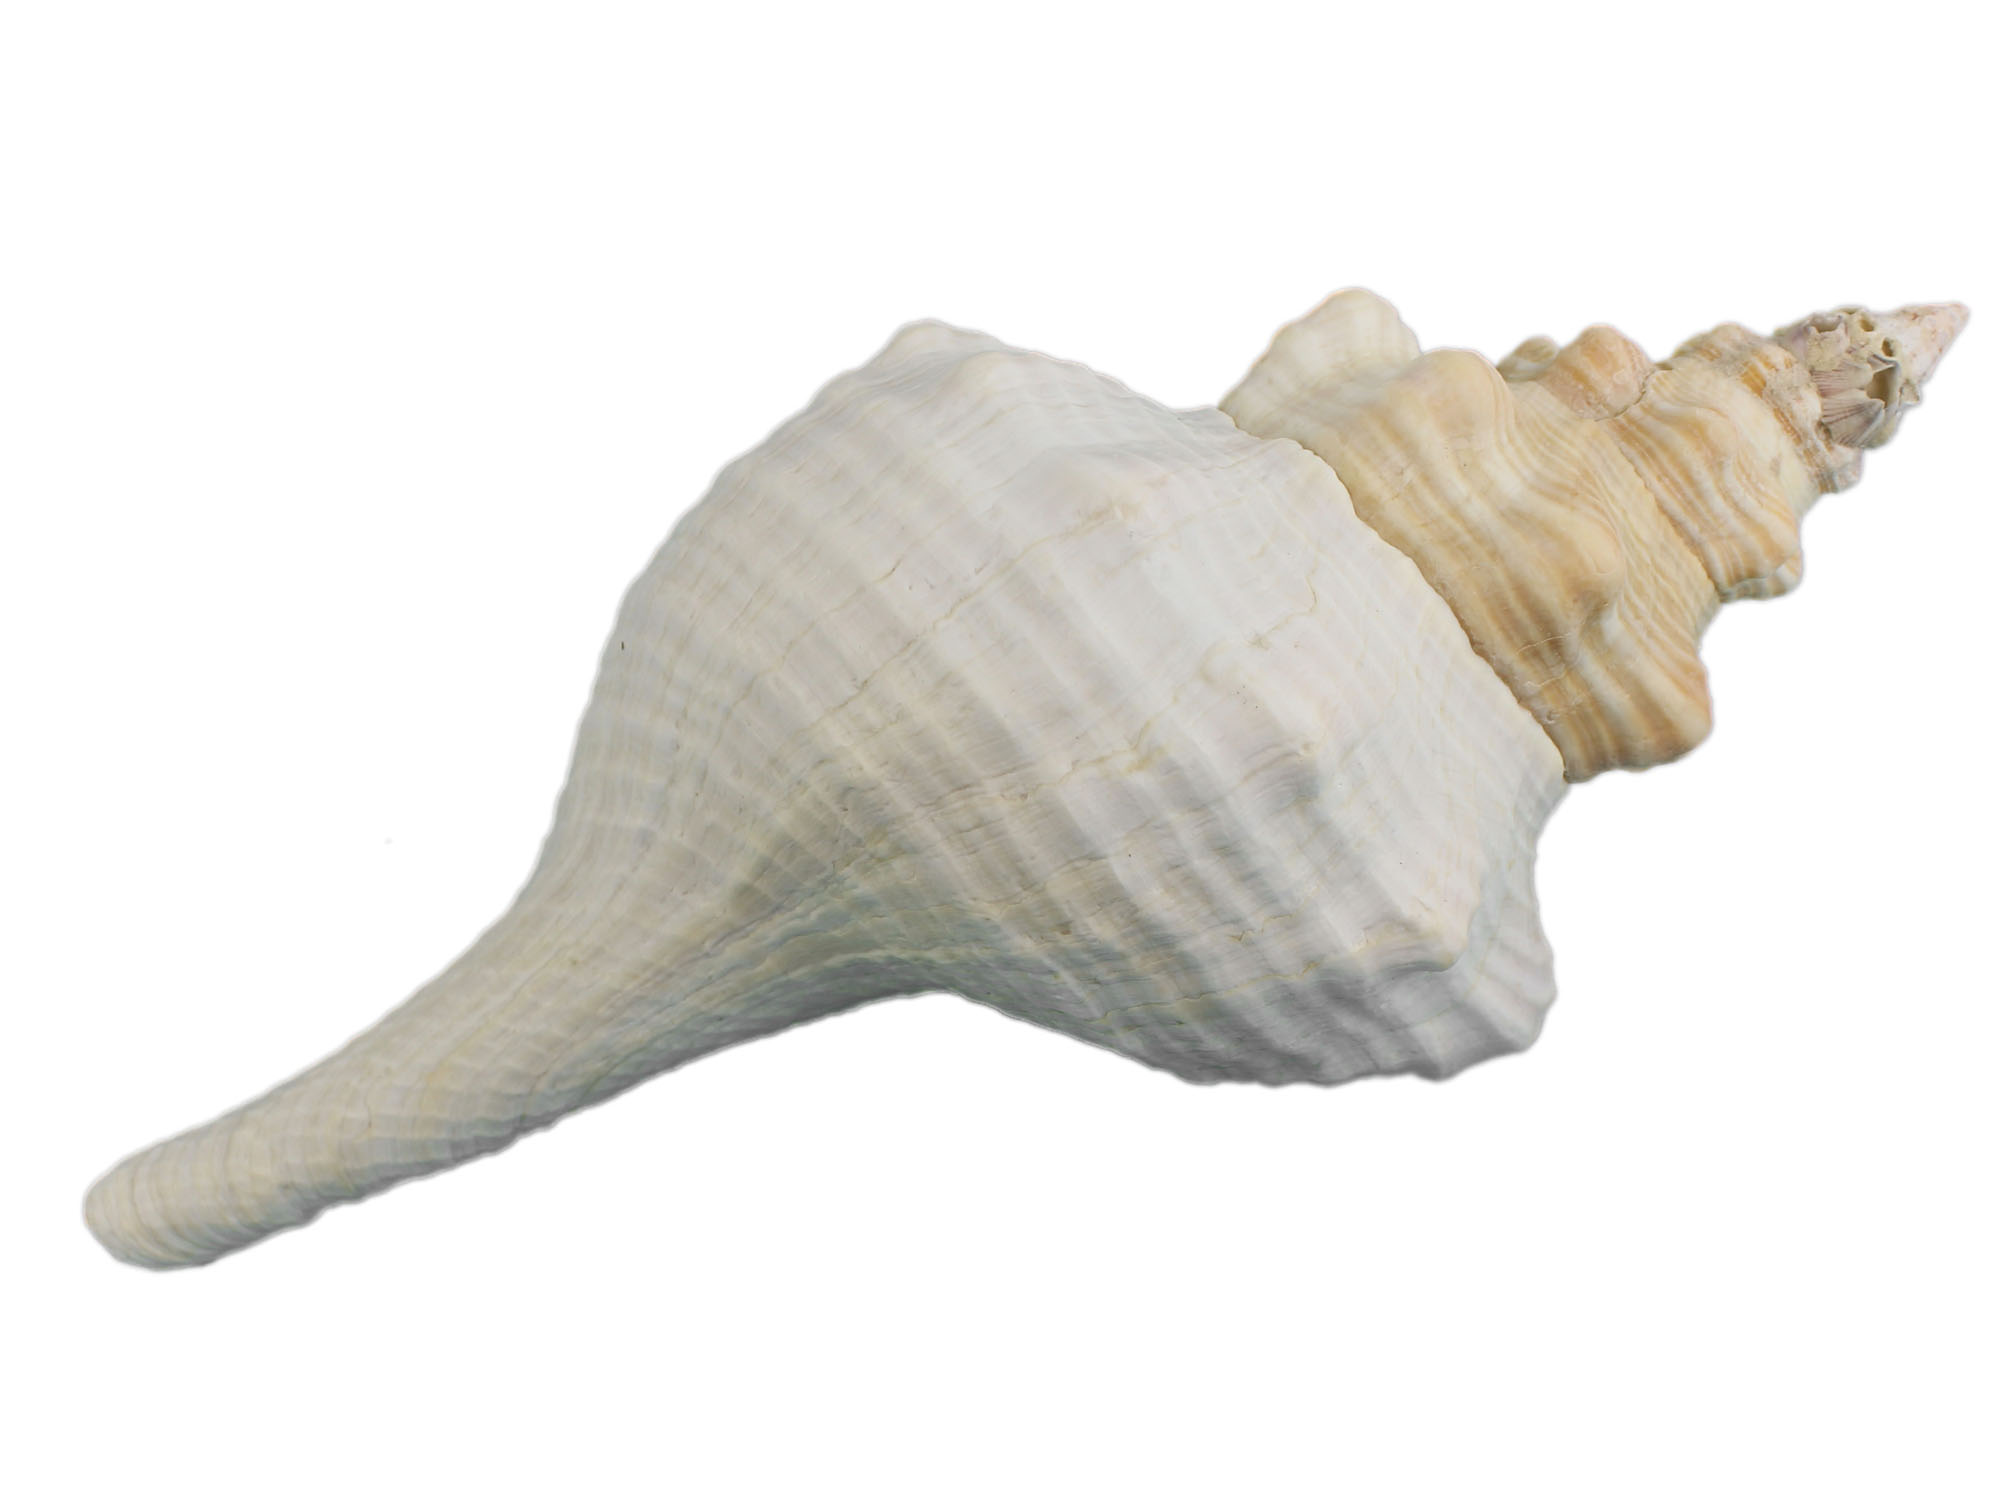 Mexican Horse Conch Shell: 11" to 12" Florida horse conch, sea snail shell